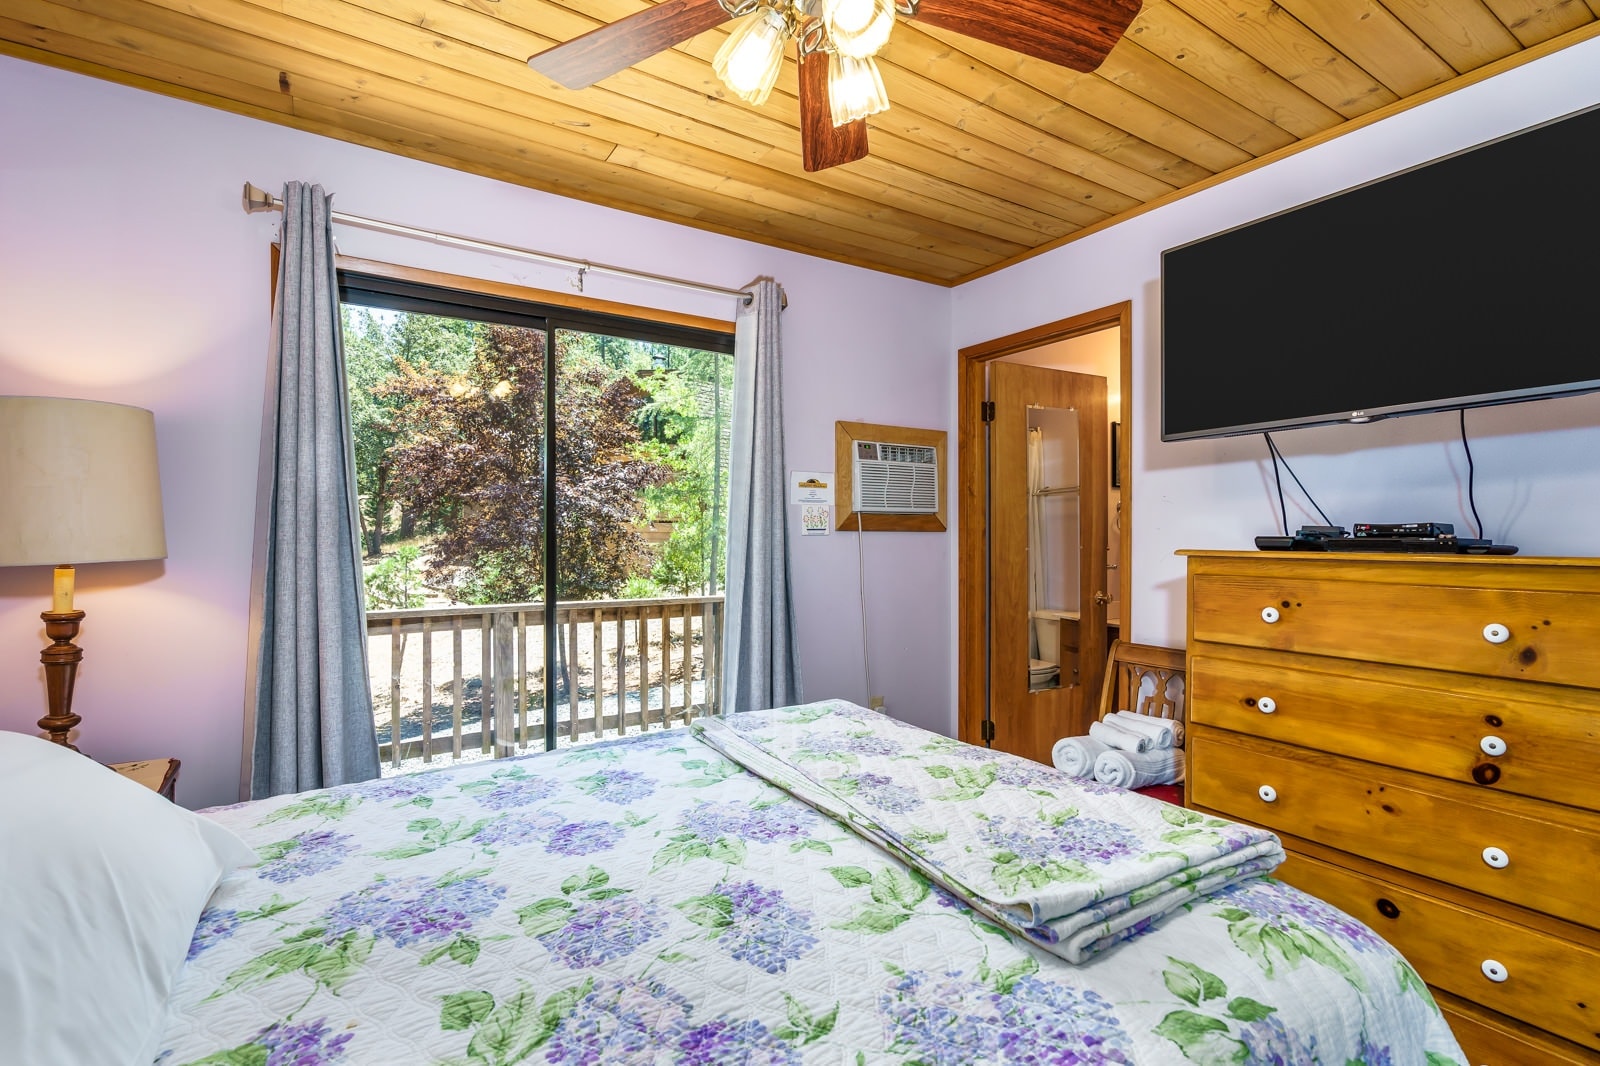 Main bedroom with flat screen tv. Unit 8 Lot 9, The Hideout, Pine Mountain Lake Vacation Rental.